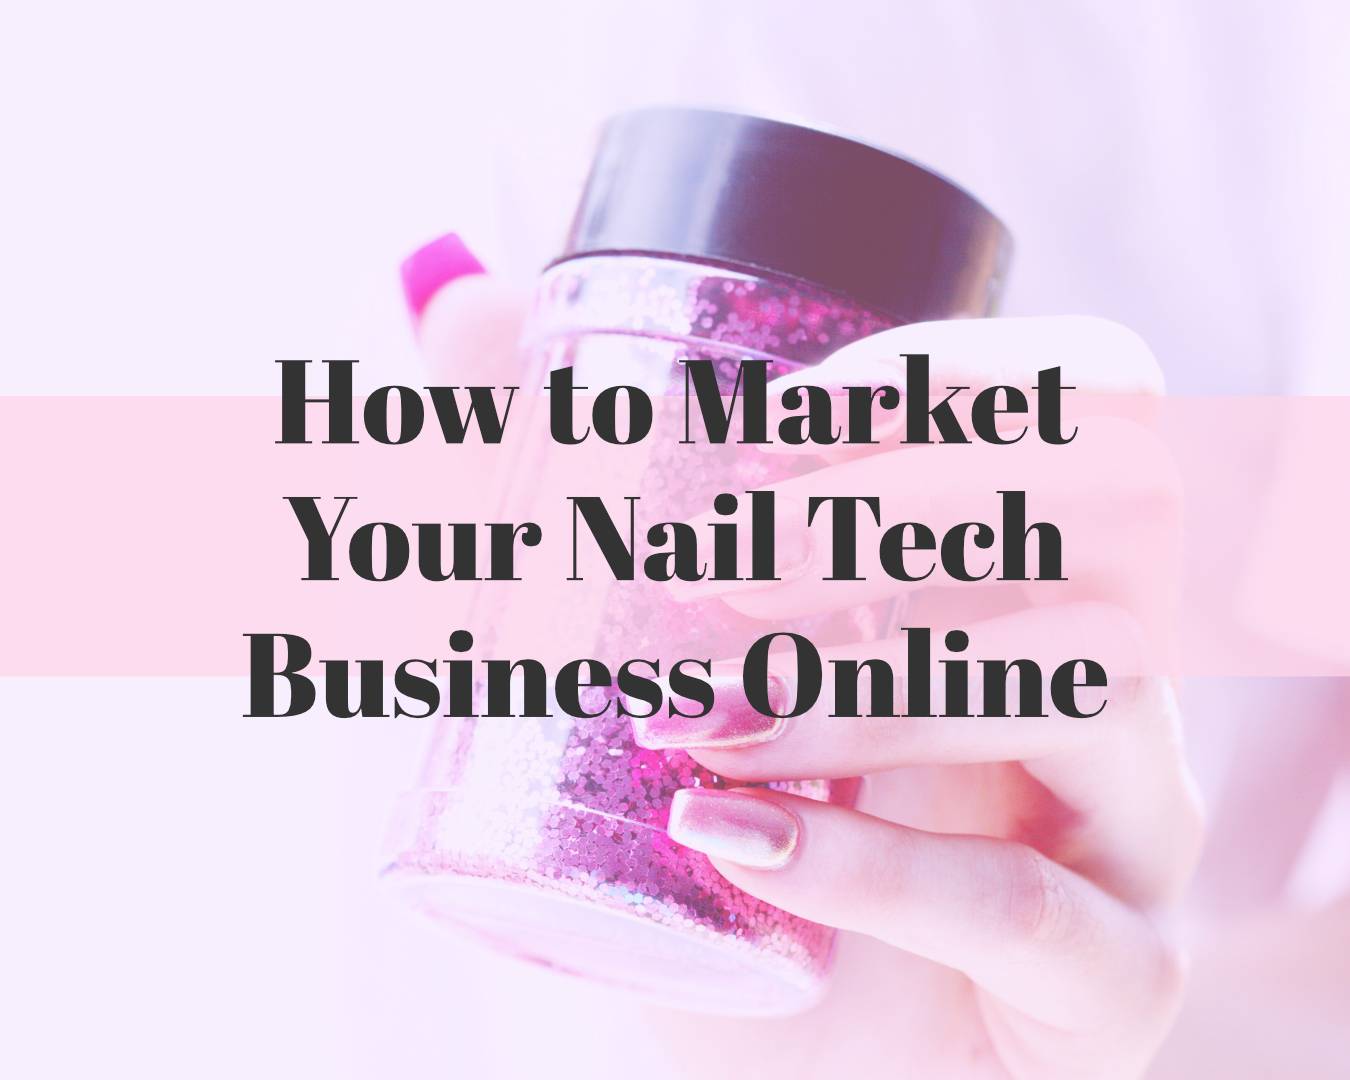 How to Market Your Nail Tech Business Online